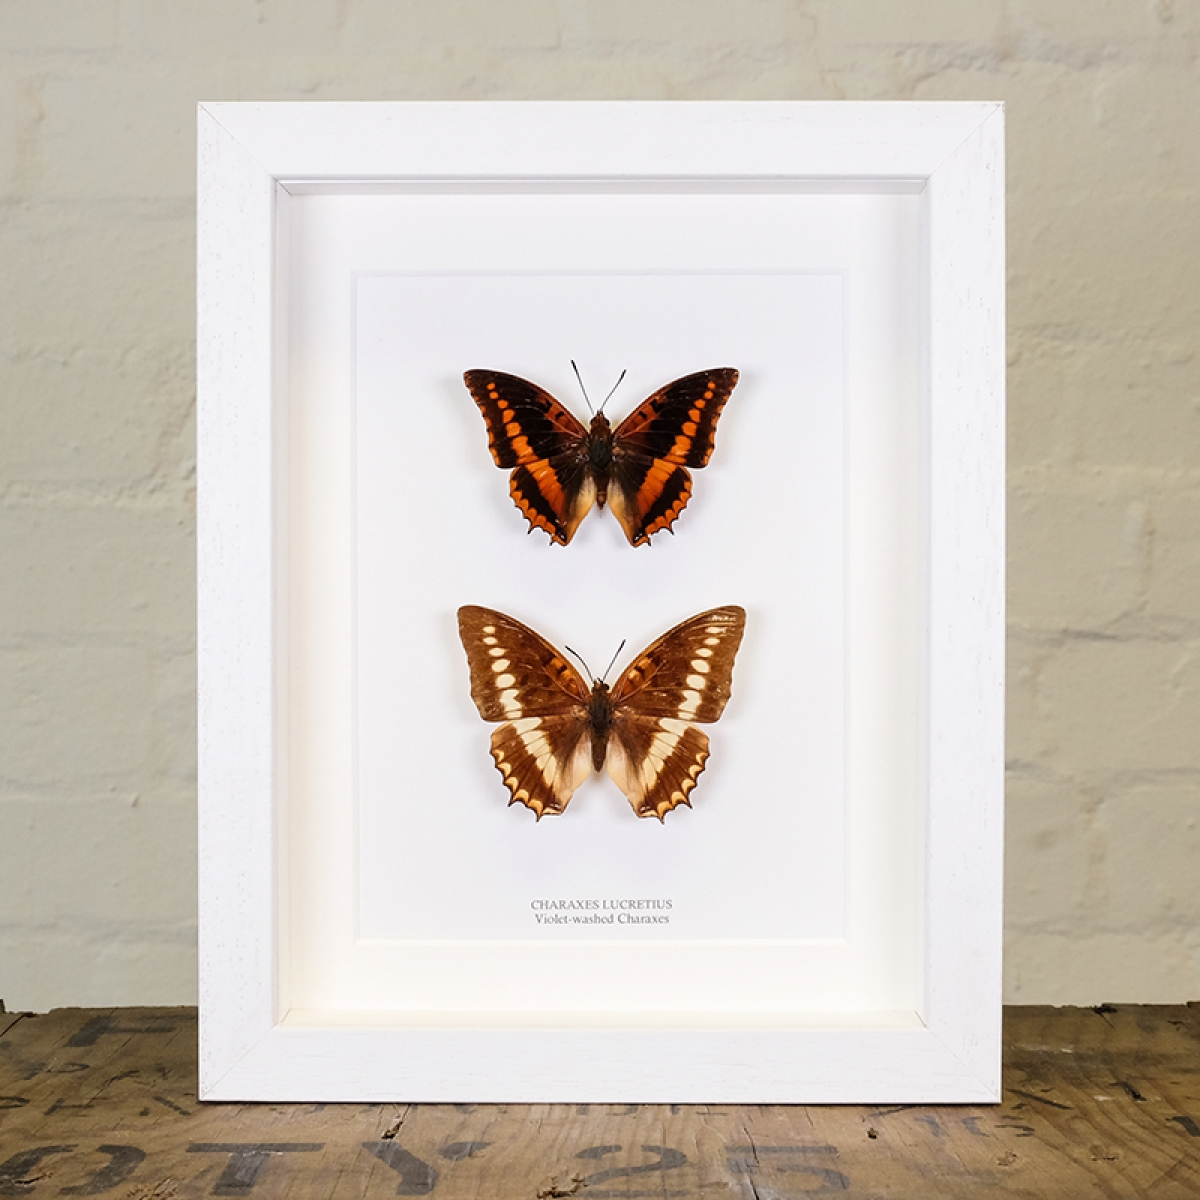 Violet-washed Male and Female Charaxes in Box Frame (Charaxes lucretius)